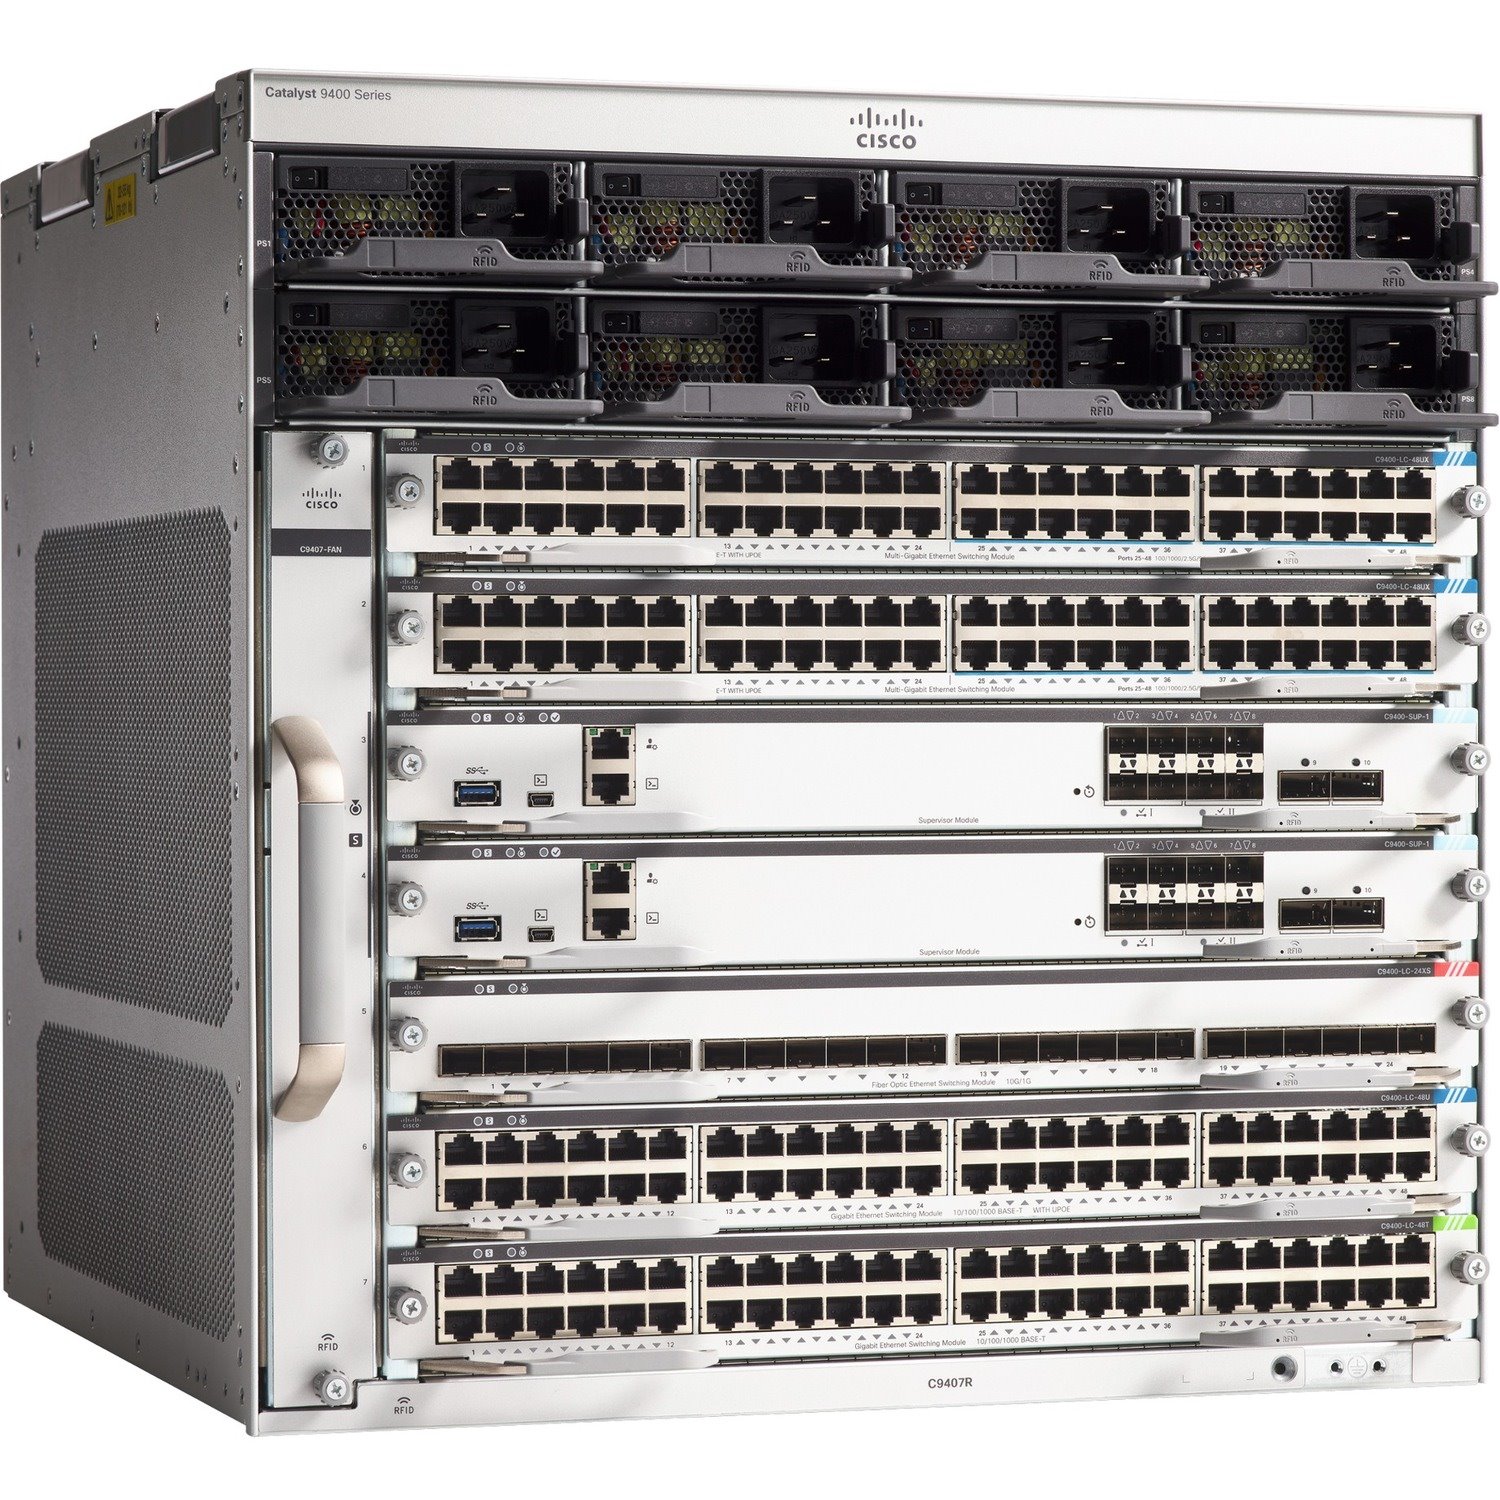 Cisco Catalyst 9400 C9407R Manageable Switch Chassis